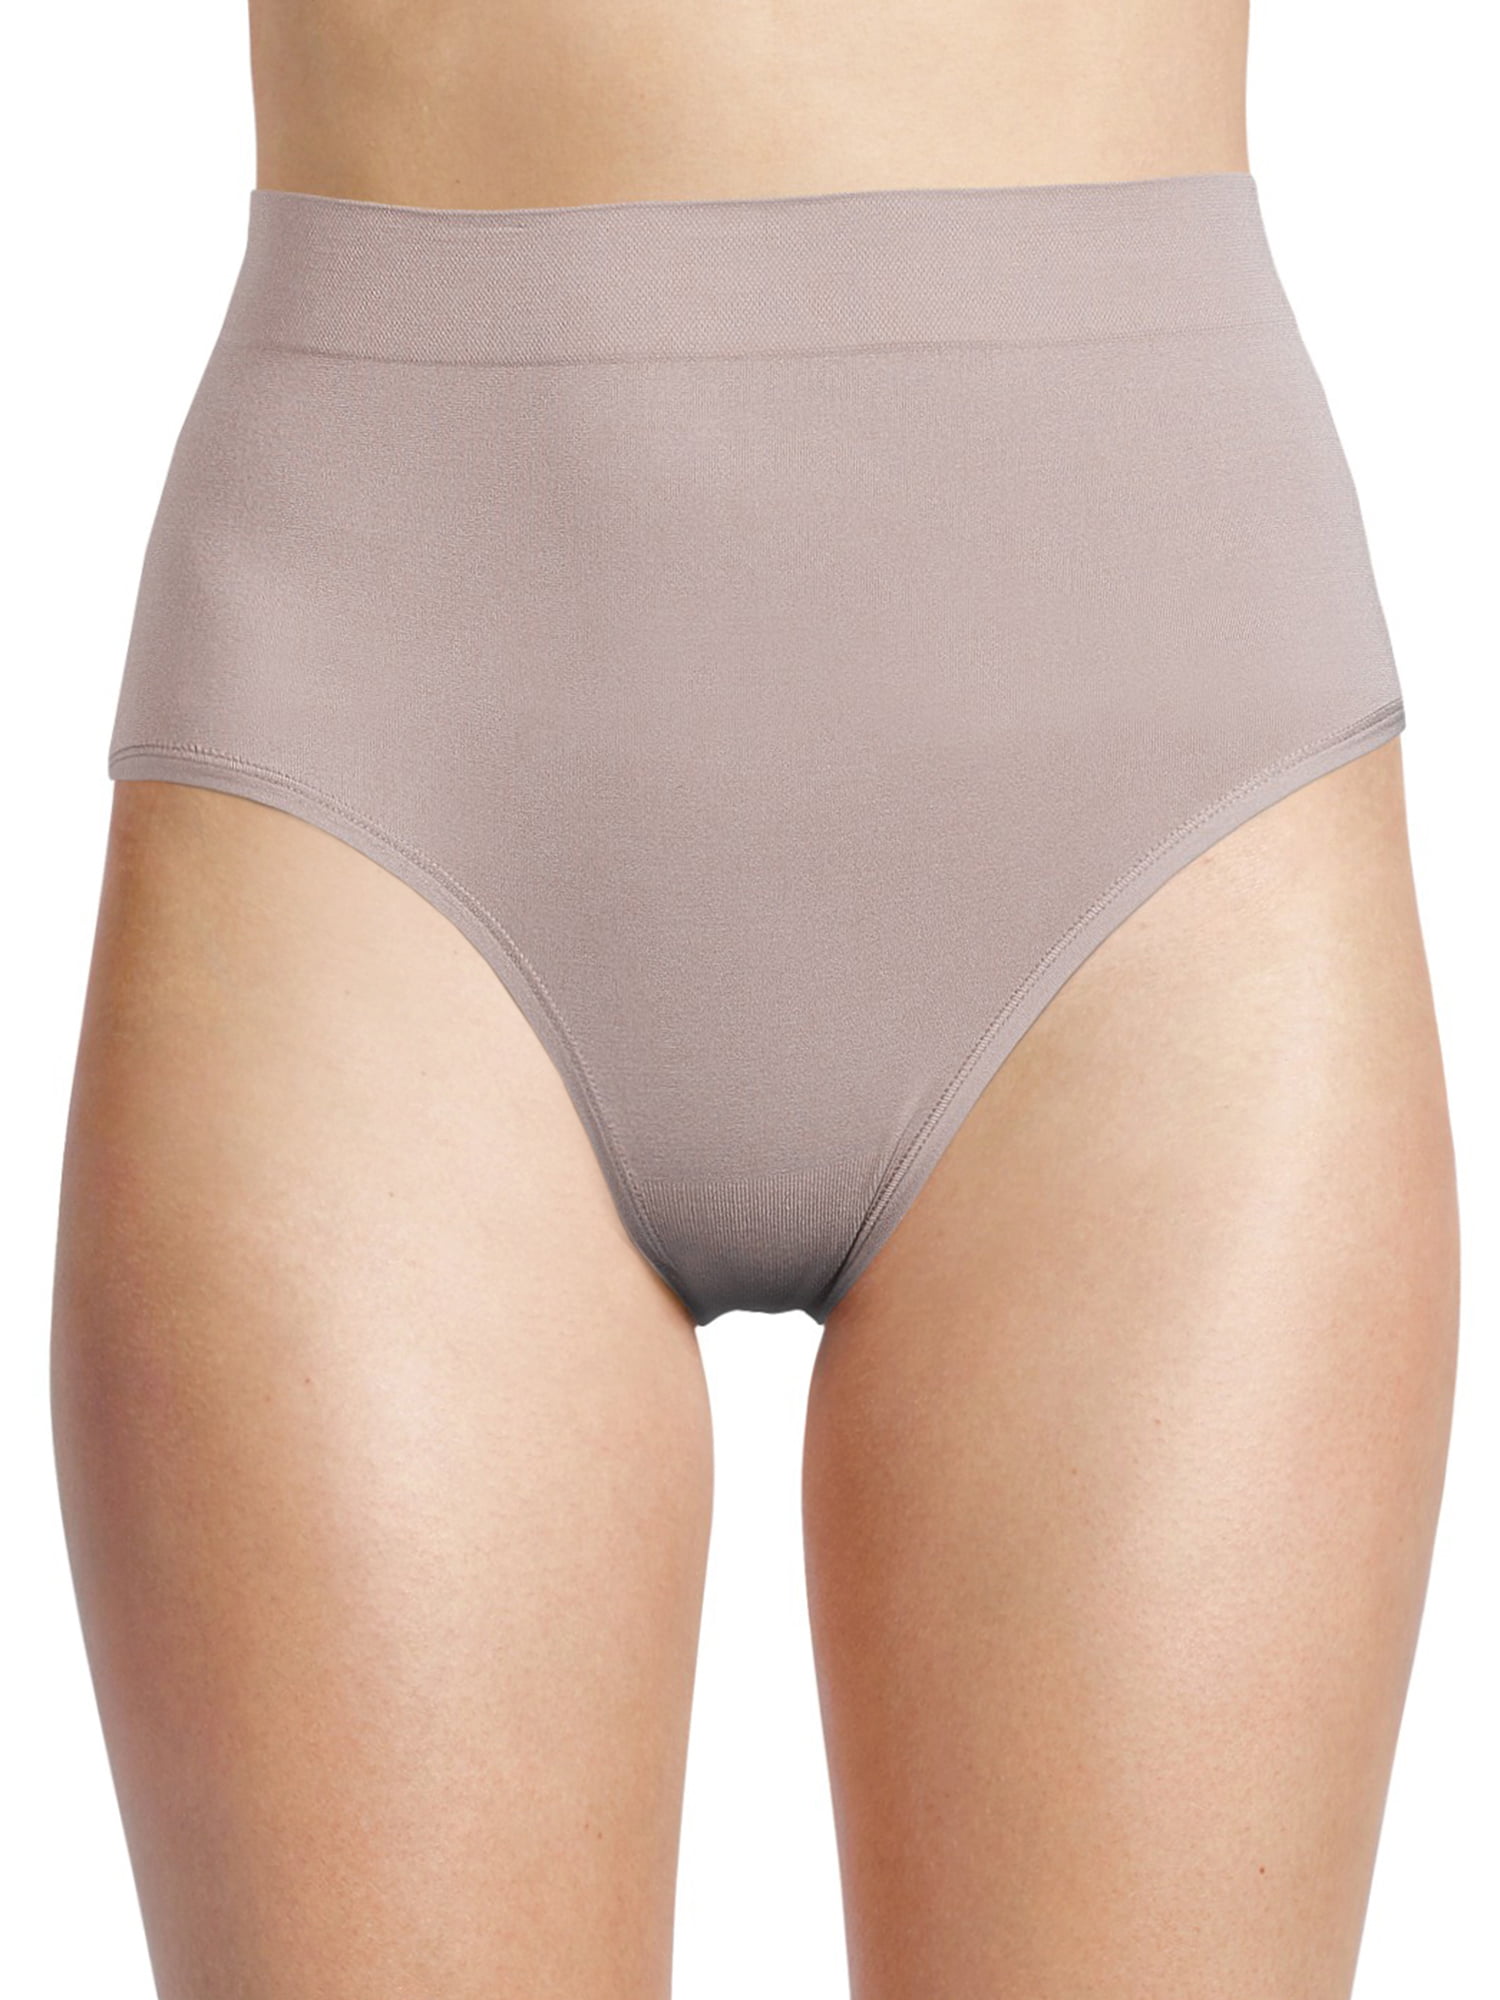 Yummie by heather thomson nylon seamless briefie 3 pack hush nude sleet +  FREE SHIPPING